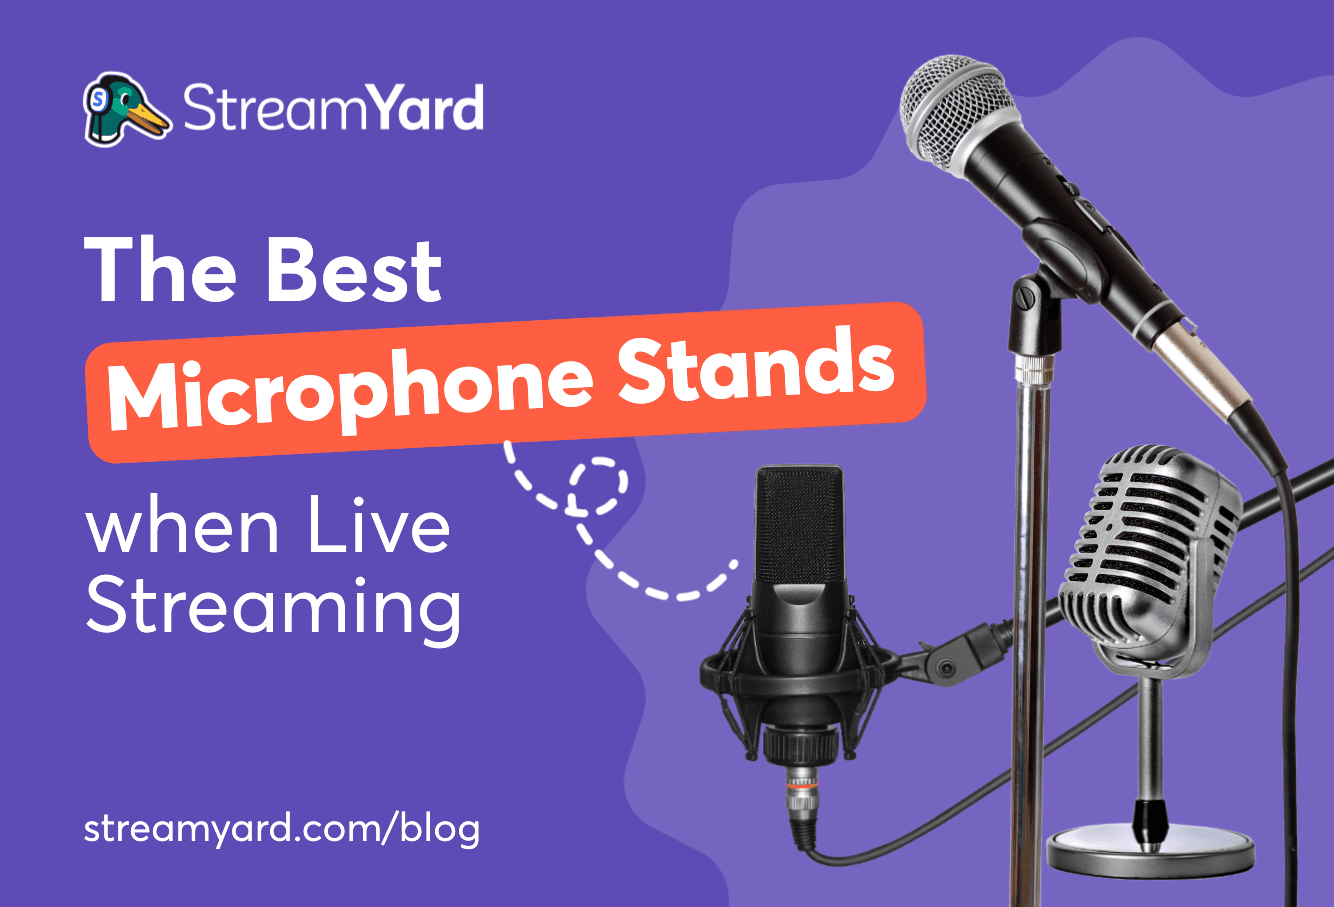 Live streams are only as good as your audio quality. Looking for the best microphone stands when live streaming? Here are our top picks.